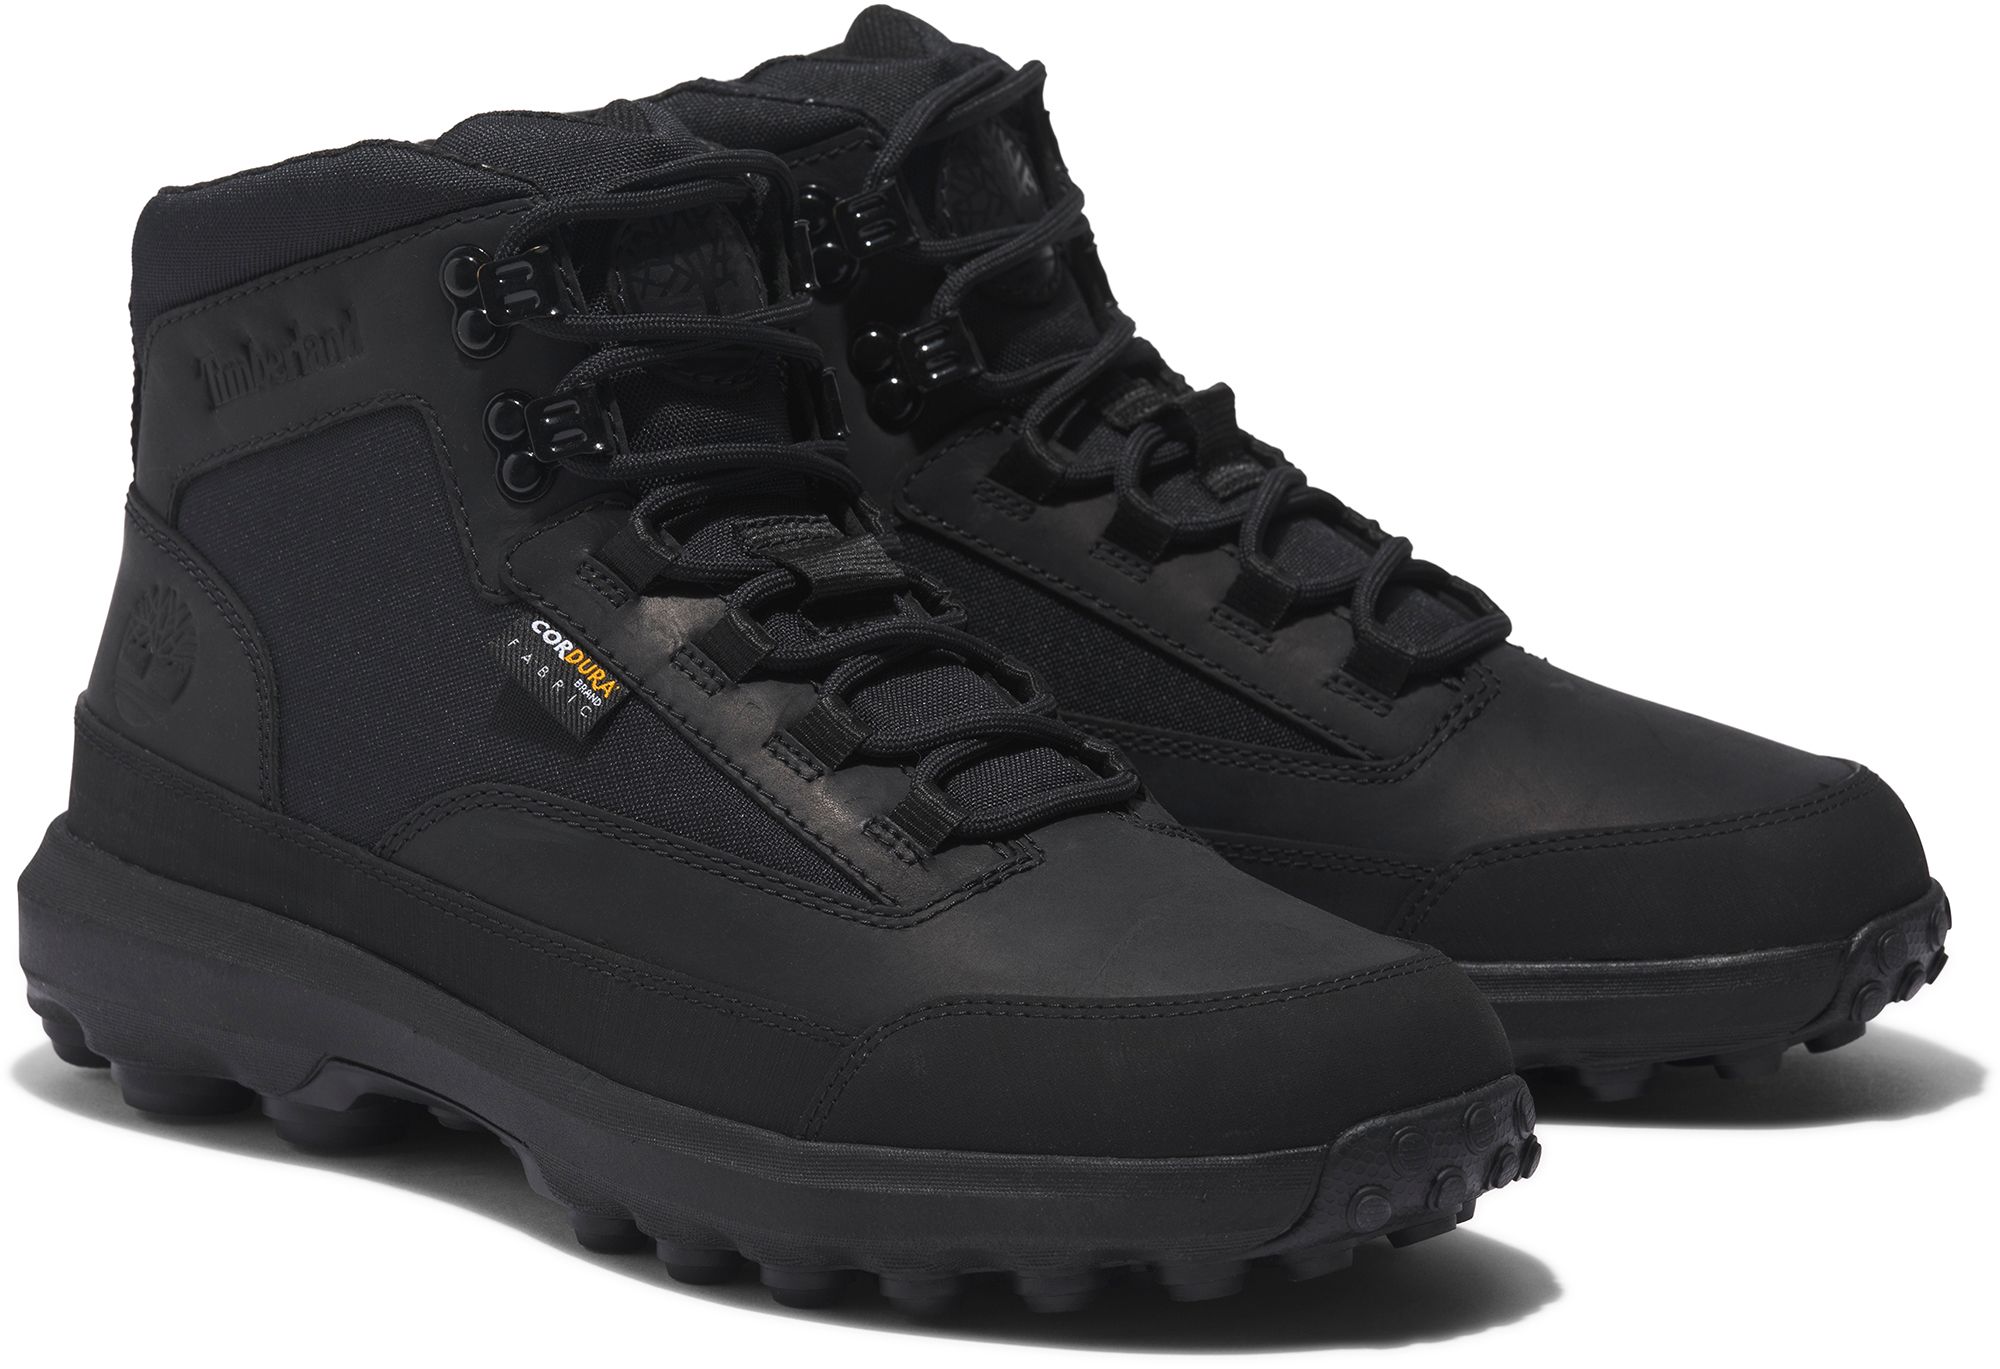 Timberland Men's Converge Hiking Boots